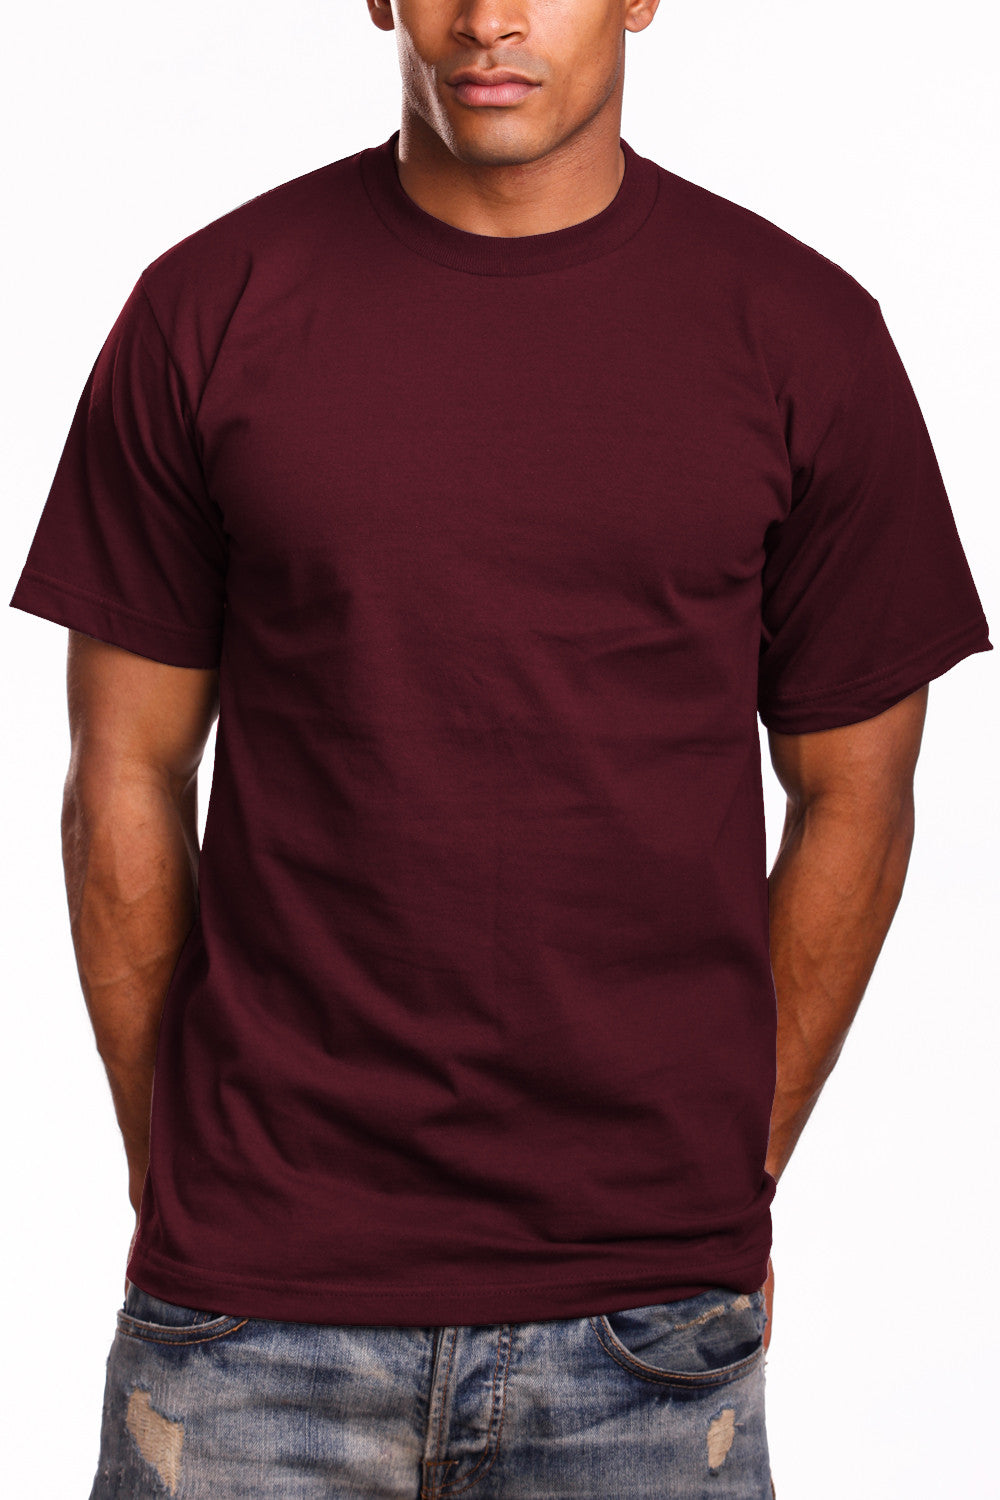 Elevate style with Athletic Fit Burgundy T-Shirts - lightweight, breathable for active living. Finer threads than Super Heavy T-shirts, ensuring comfort. Ideal for all activities, sizes 2X-5X. Colors: White, Black, Heather Grey, more. Fabric: Solid Colors-100% Cotton, Charcoal & Heather Grey-80% Cotton 20% Polyester. Weight: 5.6 oz. Seamlessly blend fashion and function with our go-to Athletic Fit T-Shirt.